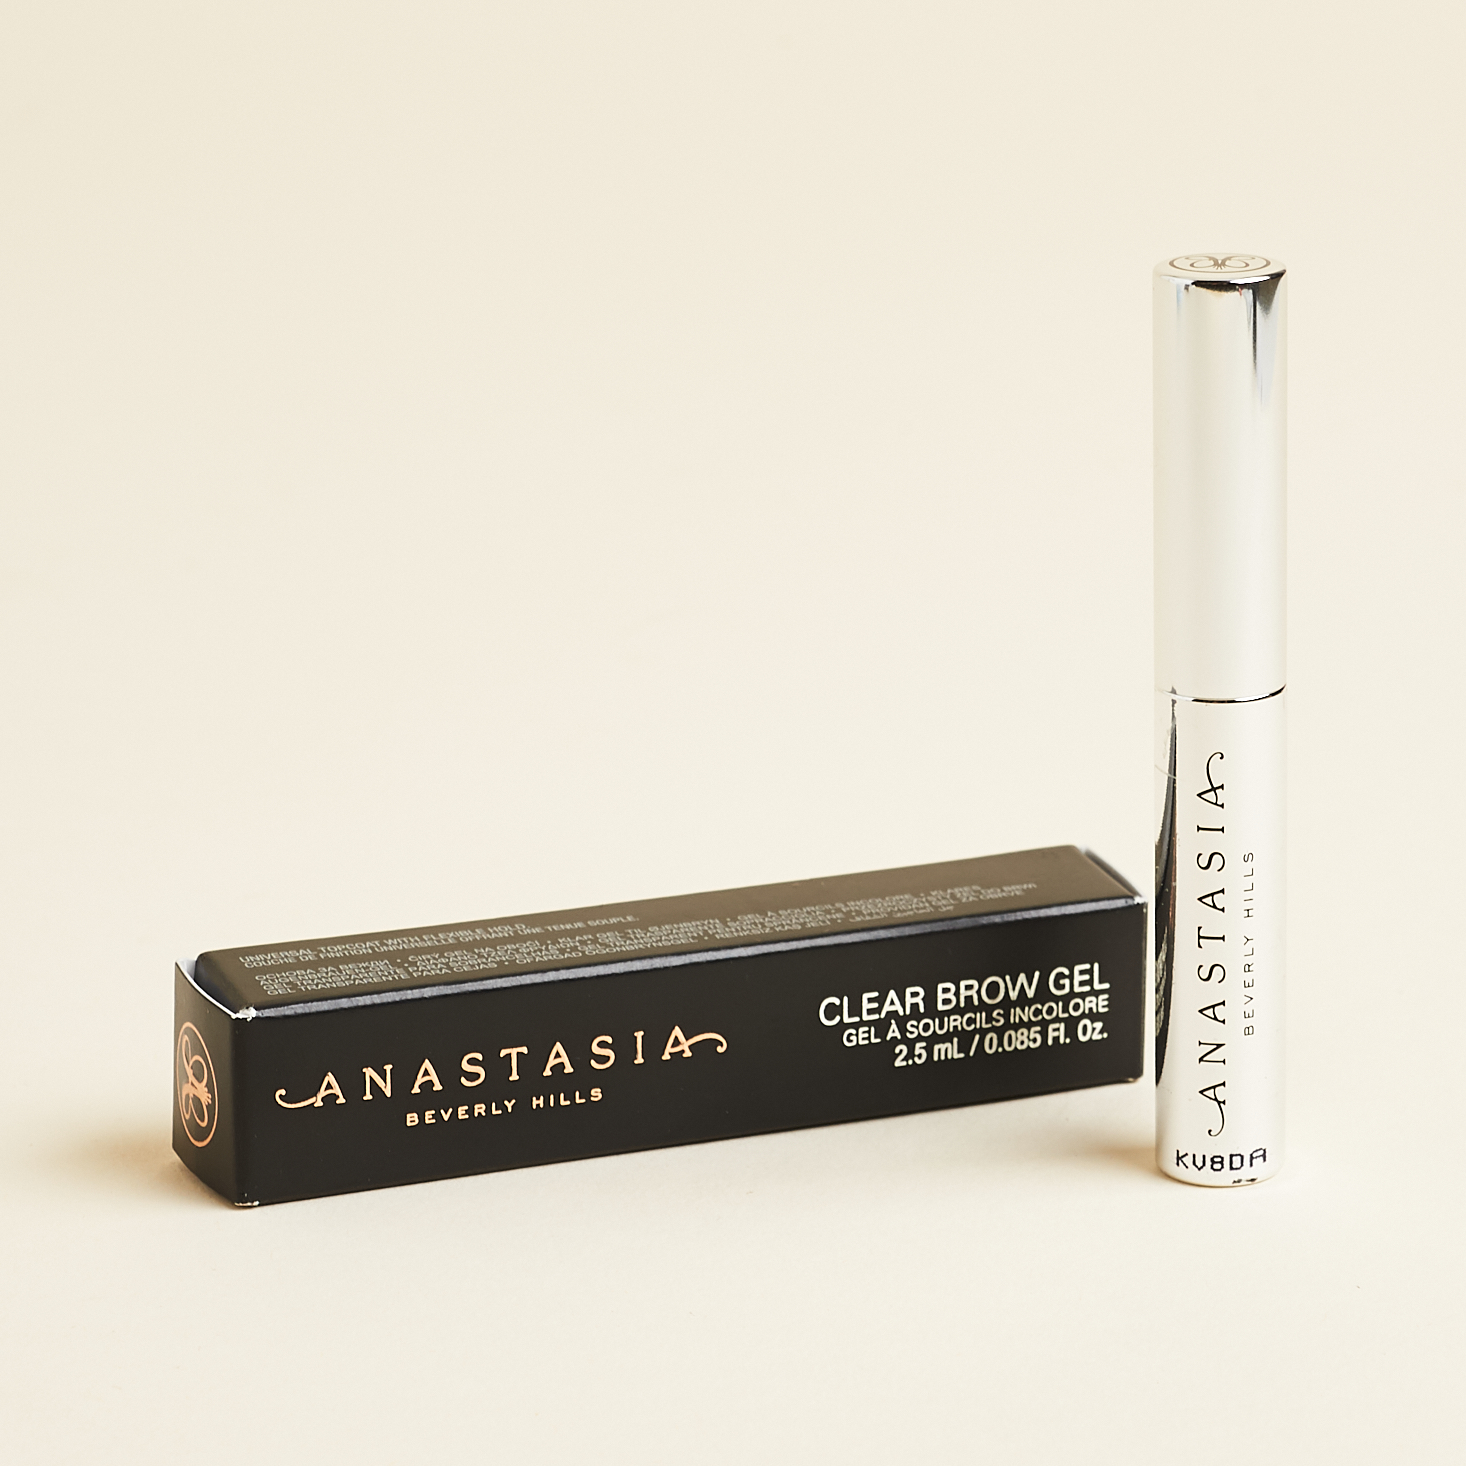 Anatasia Beverly Hills Clear Brow Gel with box